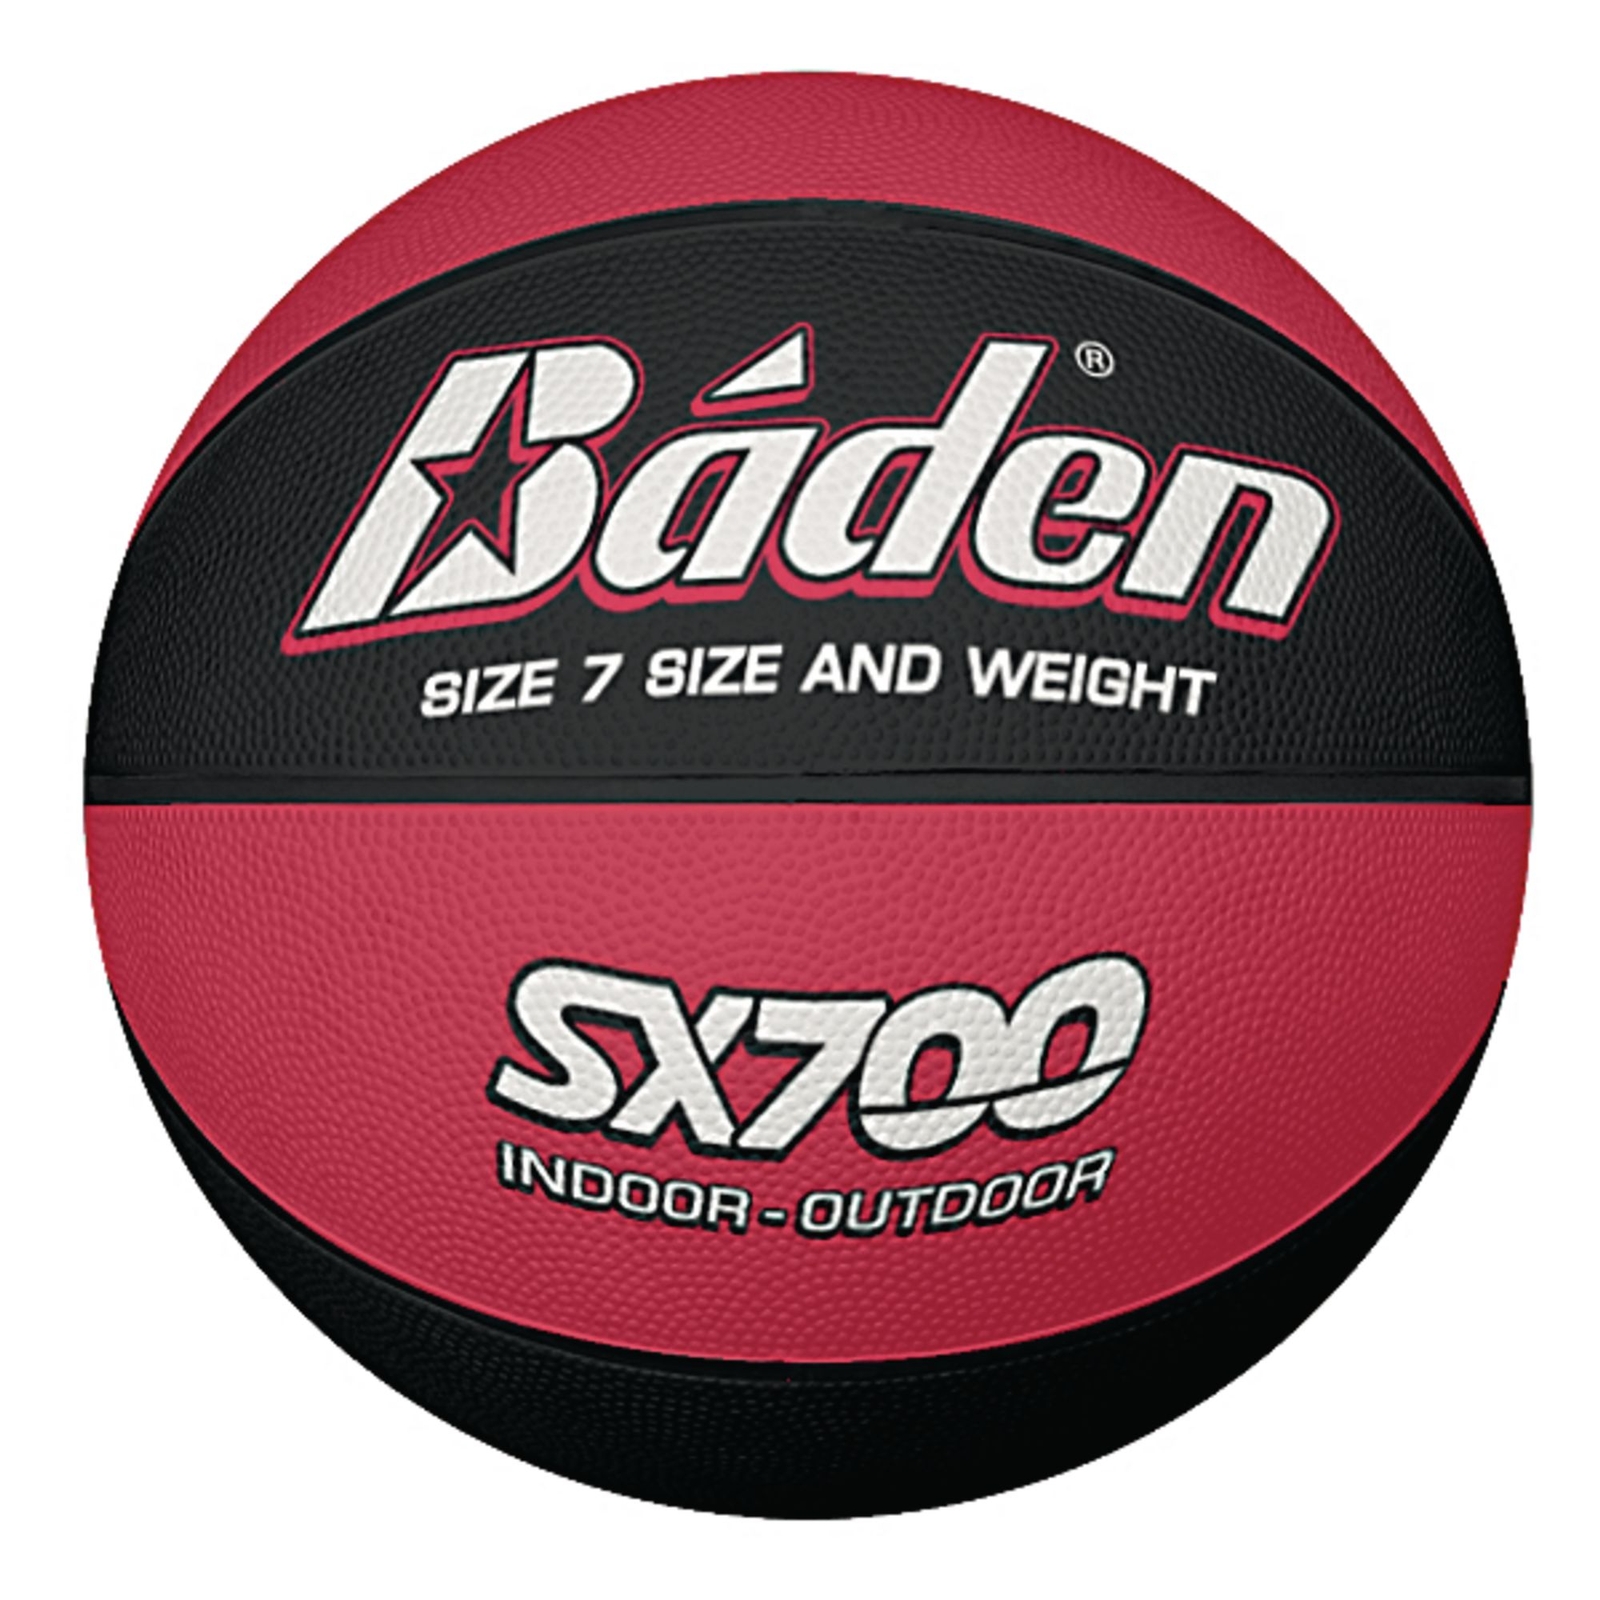 Baden SX700 Basketball - Size 7 - Red/Black